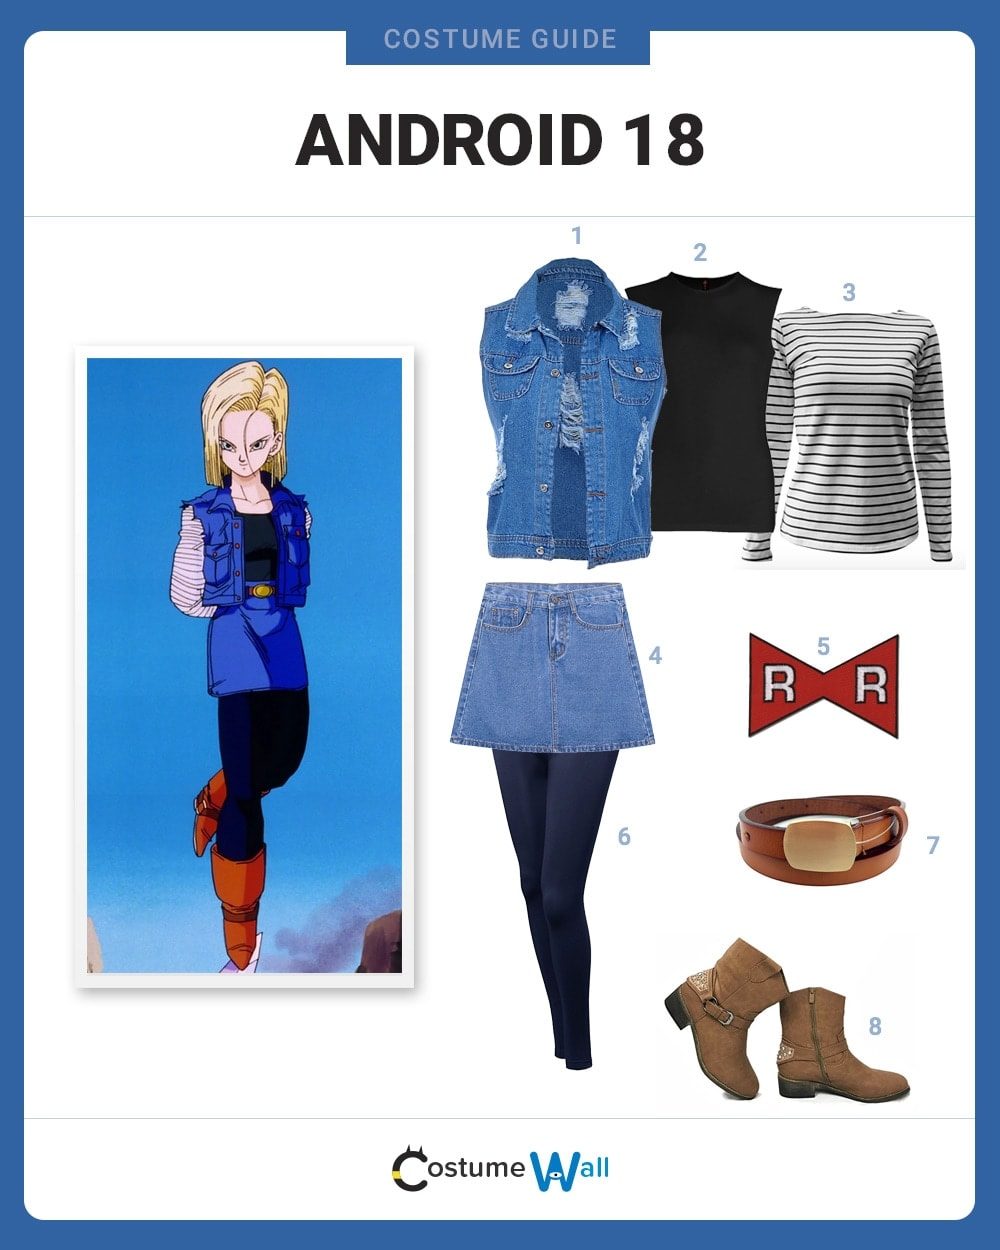 Android 18 Costume Guide